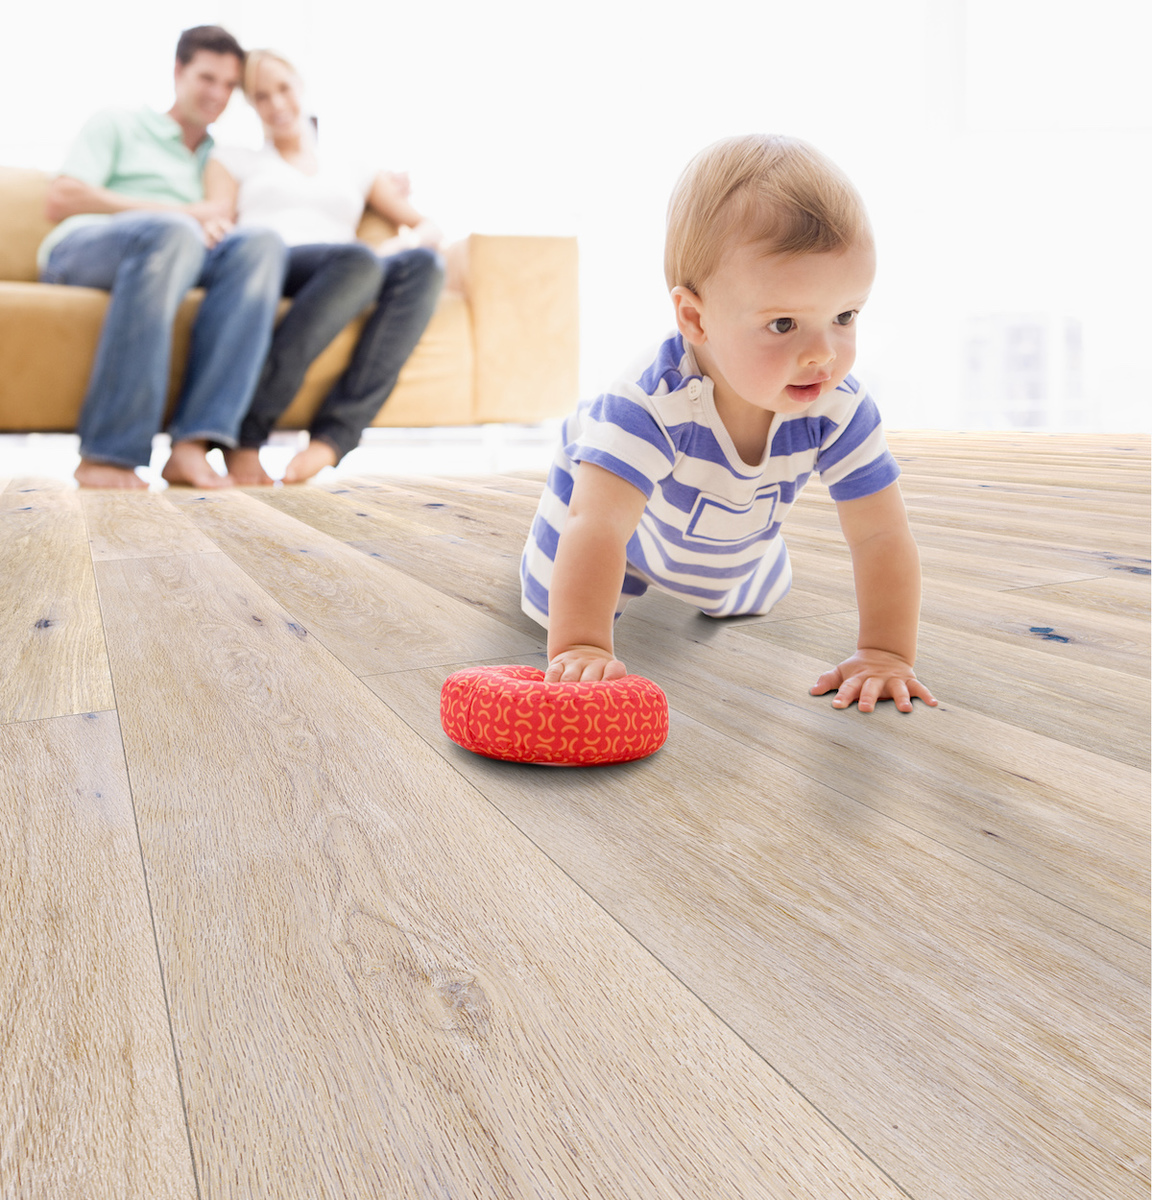 6 Of The Best Home Flooring Options To Have With Kids & Why It Looks Amazing